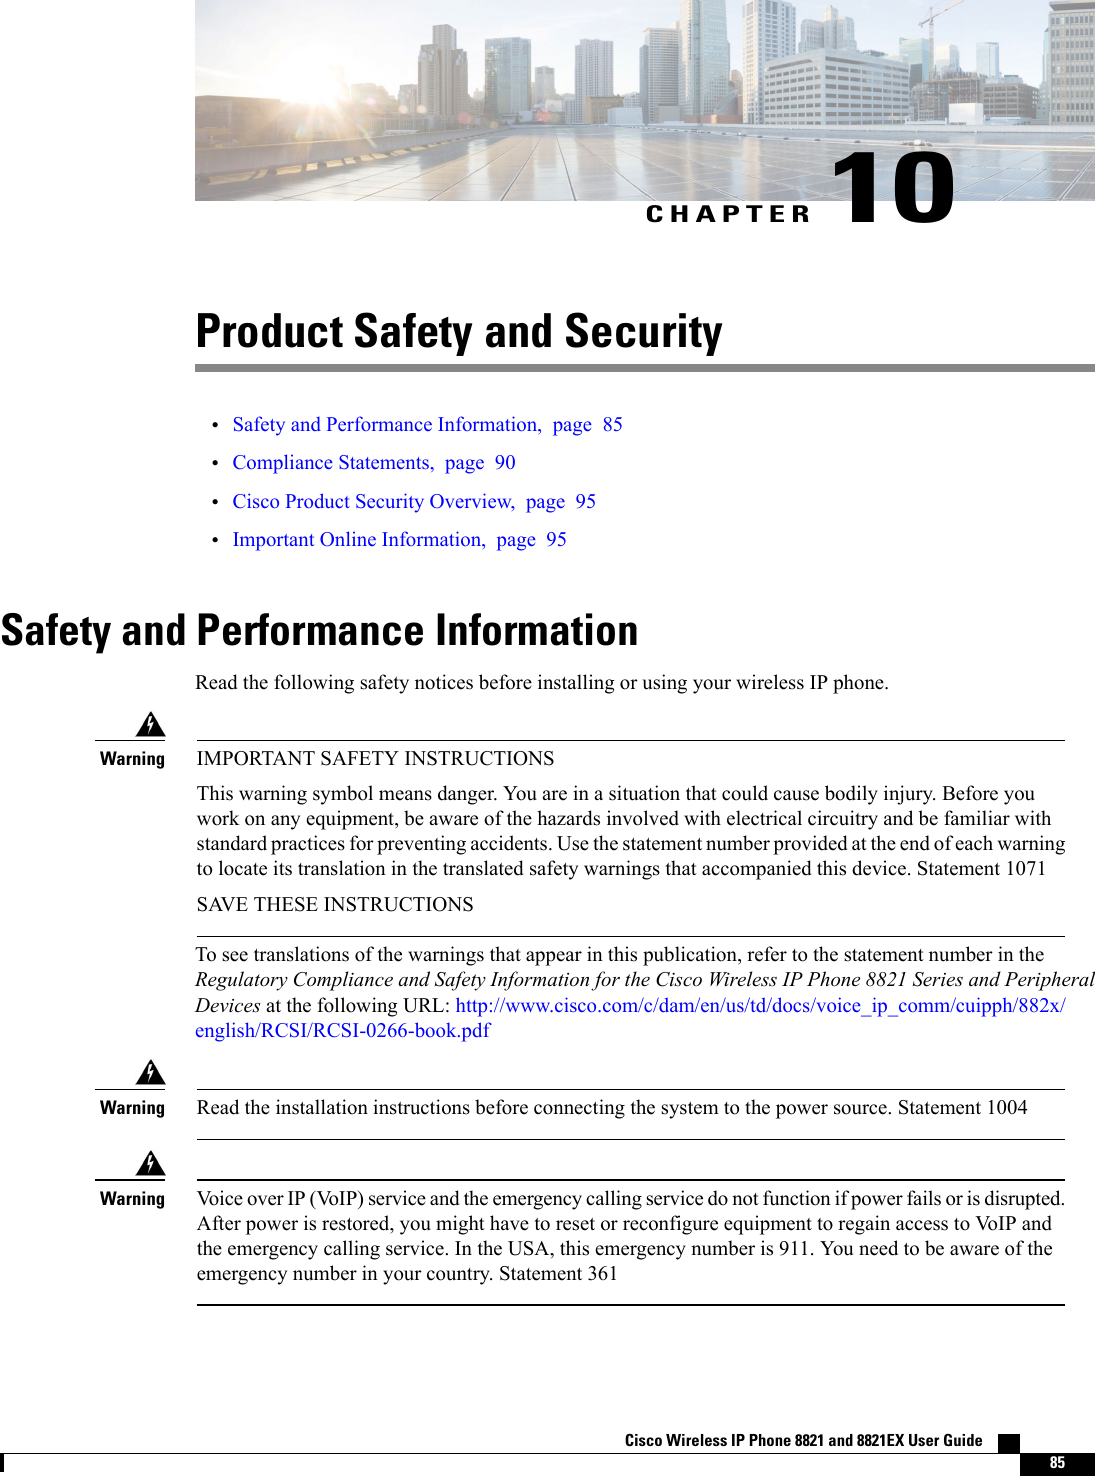 CHAPTER 10Product Safety and Security•Safety and Performance Information, page 85•Compliance Statements, page 90•Cisco Product Security Overview, page 95•Important Online Information, page 95Safety and Performance InformationRead the following safety notices before installing or using your wireless IP phone.IMPORTANT SAFETY INSTRUCTIONSThis warning symbol means danger. You are in a situation that could cause bodily injury. Before youwork on any equipment, be aware of the hazards involved with electrical circuitry and be familiar withstandard practices for preventing accidents. Use the statement number provided at the end of each warningto locate its translation in the translated safety warnings that accompanied this device. Statement 1071SAVE THESE INSTRUCTIONSWarningTo see translations of the warnings that appear in this publication, refer to the statement number in theRegulatory Compliance and Safety Information for the Cisco Wireless IP Phone 8821 Series and PeripheralDevices at the following URL: http://www.cisco.com/c/dam/en/us/td/docs/voice_ip_comm/cuipph/882x/english/RCSI/RCSI-0266-book.pdfRead the installation instructions before connecting the system to the power source. Statement 1004WarningVoice over IP (VoIP) service and the emergency calling service do not function if power fails or is disrupted.After power is restored, you might have to reset or reconfigure equipment to regain access to VoIP andthe emergency calling service. In the USA, this emergency number is 911. You need to be aware of theemergency number in your country. Statement 361WarningCisco Wireless IP Phone 8821 and 8821EX User Guide    85